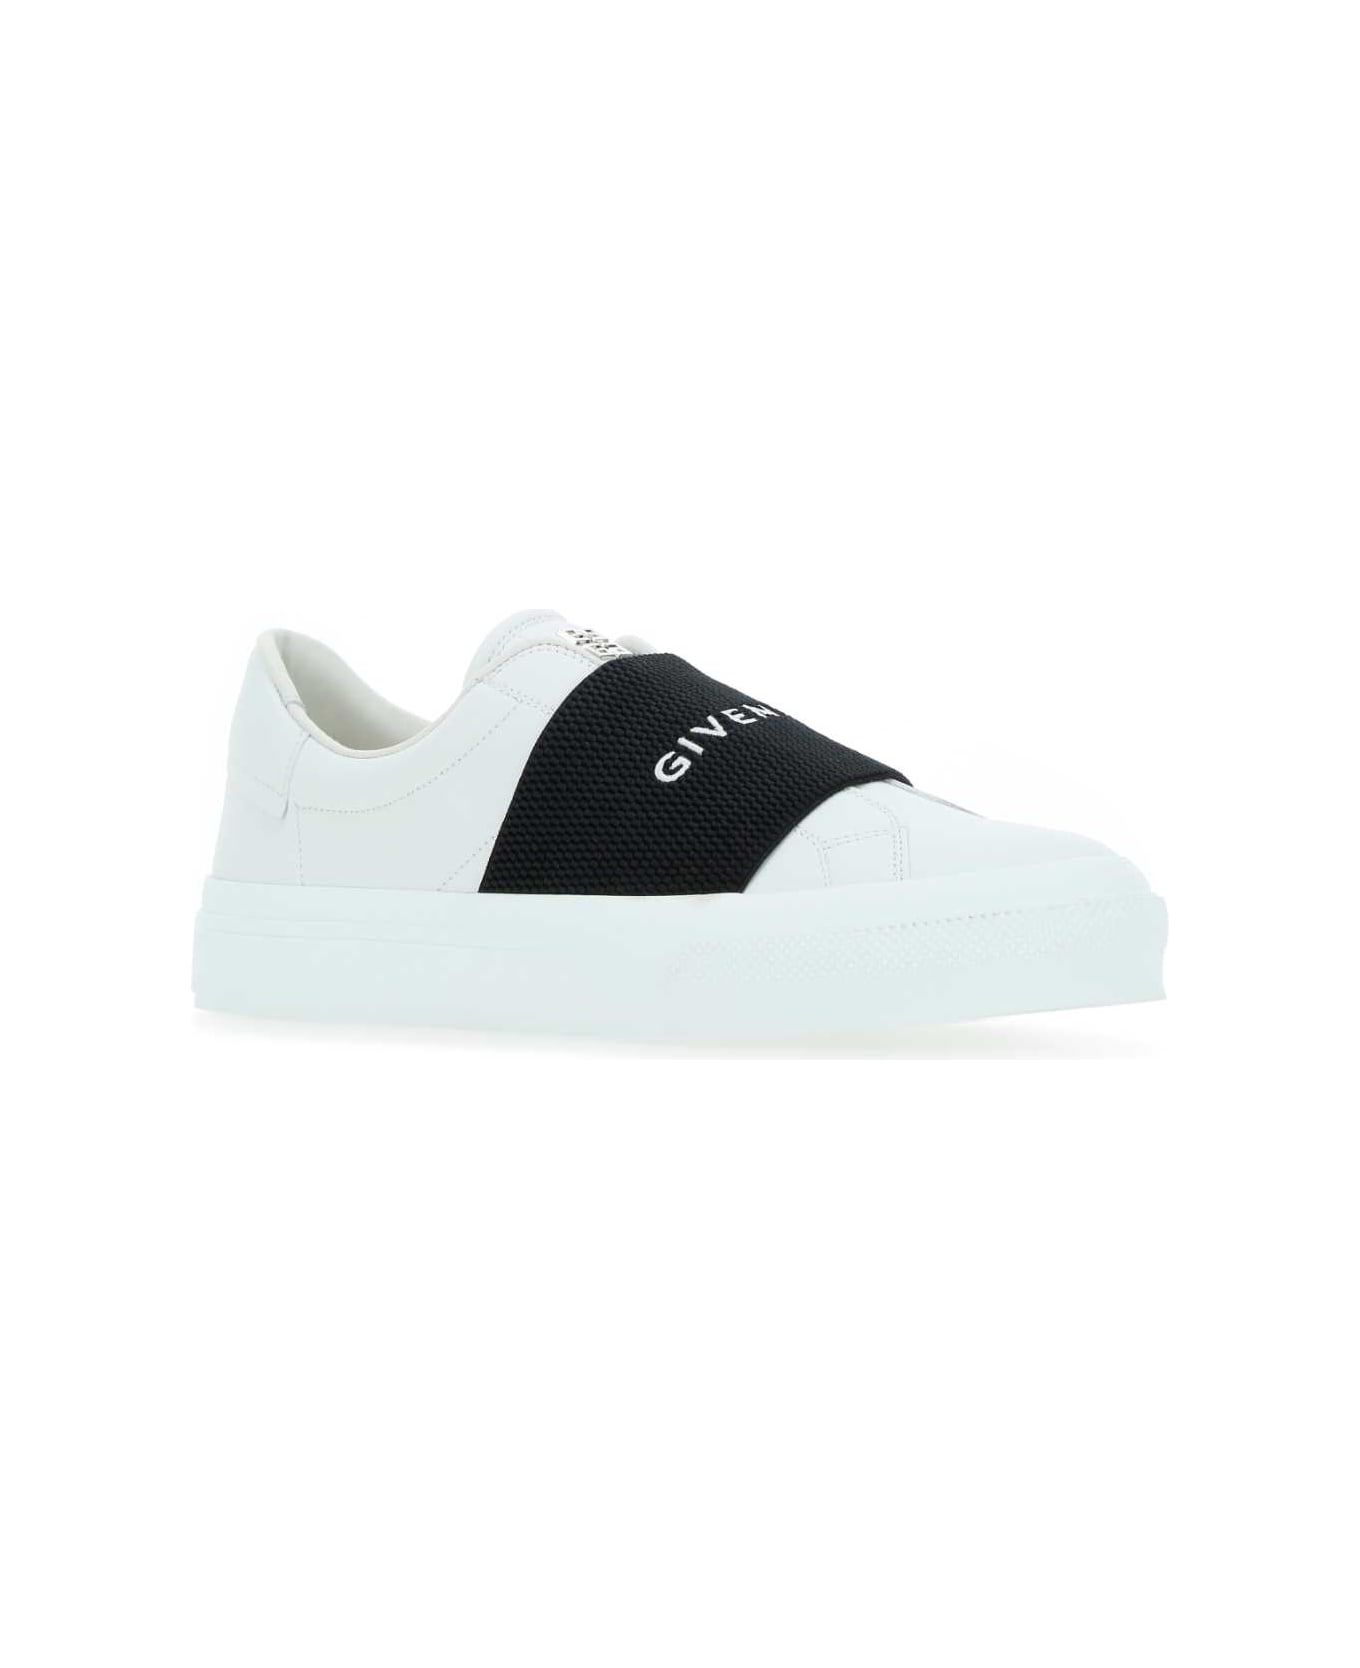 Givenchy White Leather City Slip Ons - 116